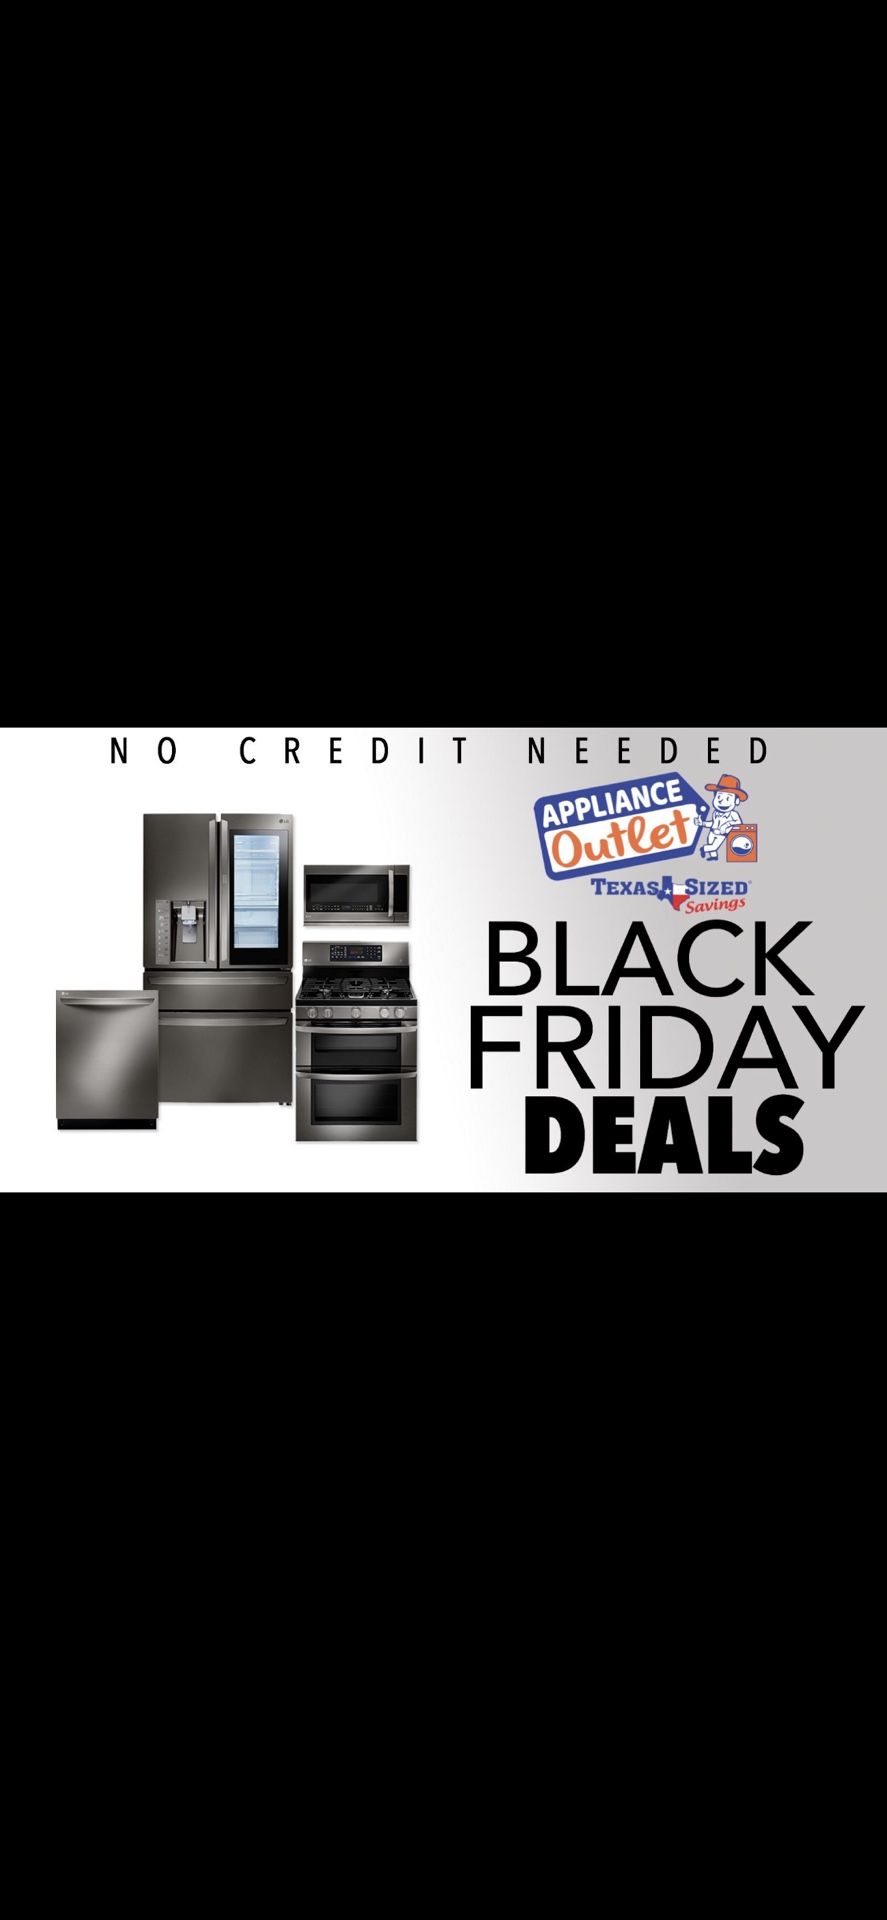 BRAND NEW APPLIANCES AT A DISCOUNTED PRICES